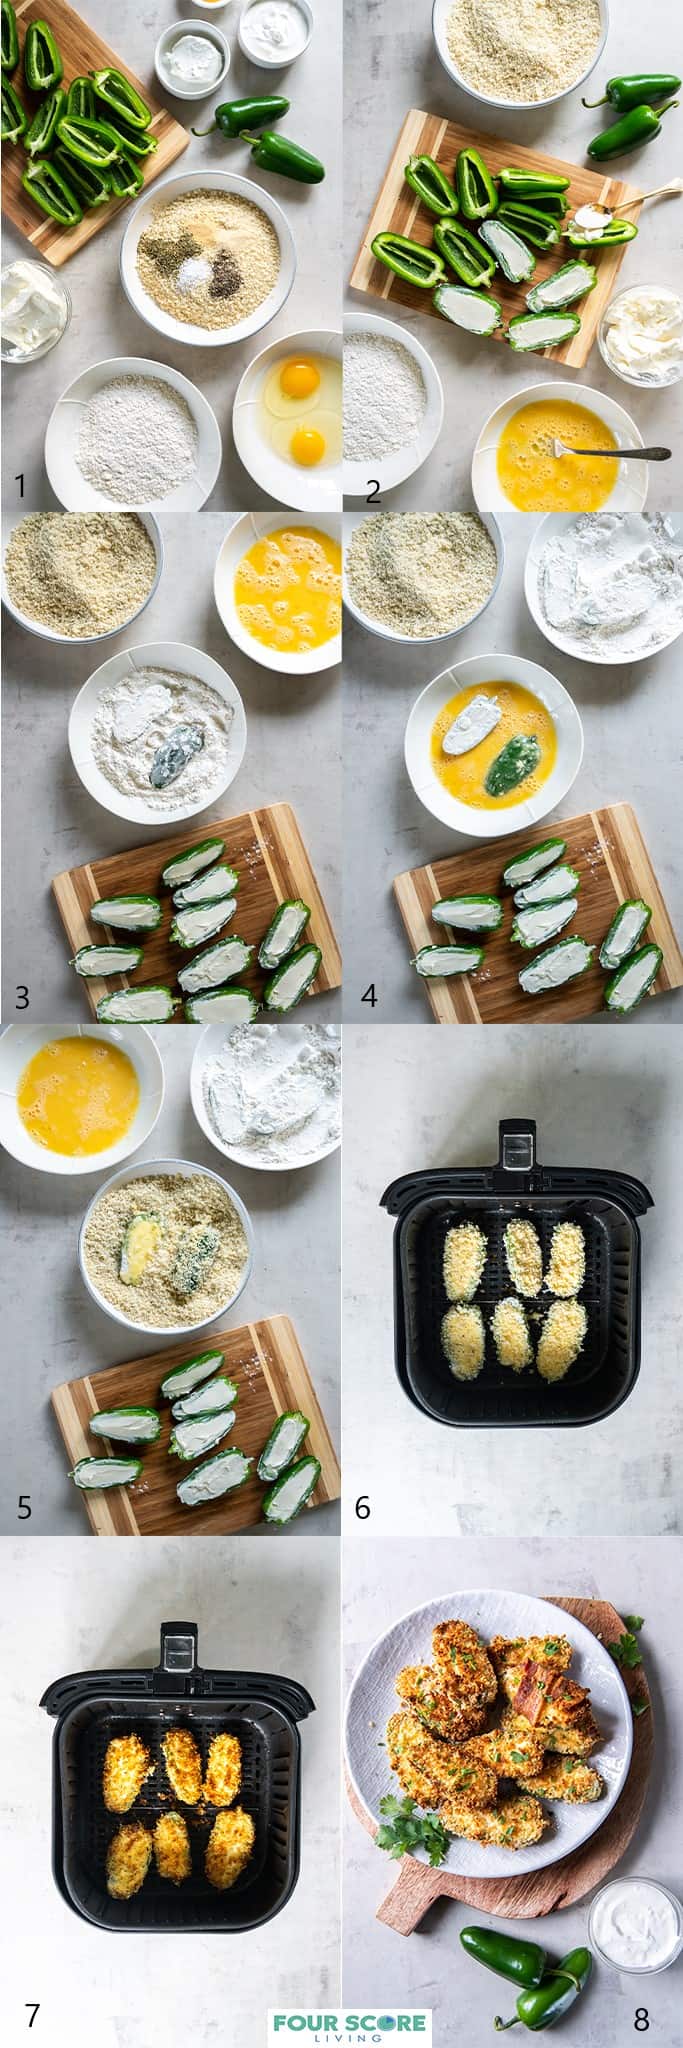 Aerial view of a ingredients and eight steps to make air fryer jalapeno poppers, including a wood cutting board of 8 whole, fresh jalapenos, dishes of salt and pepper, eggs, flour, cream cheese, bread crumbs, flour and a basket of an air fryer layered with uncooked and cooked jalapeno poppers.